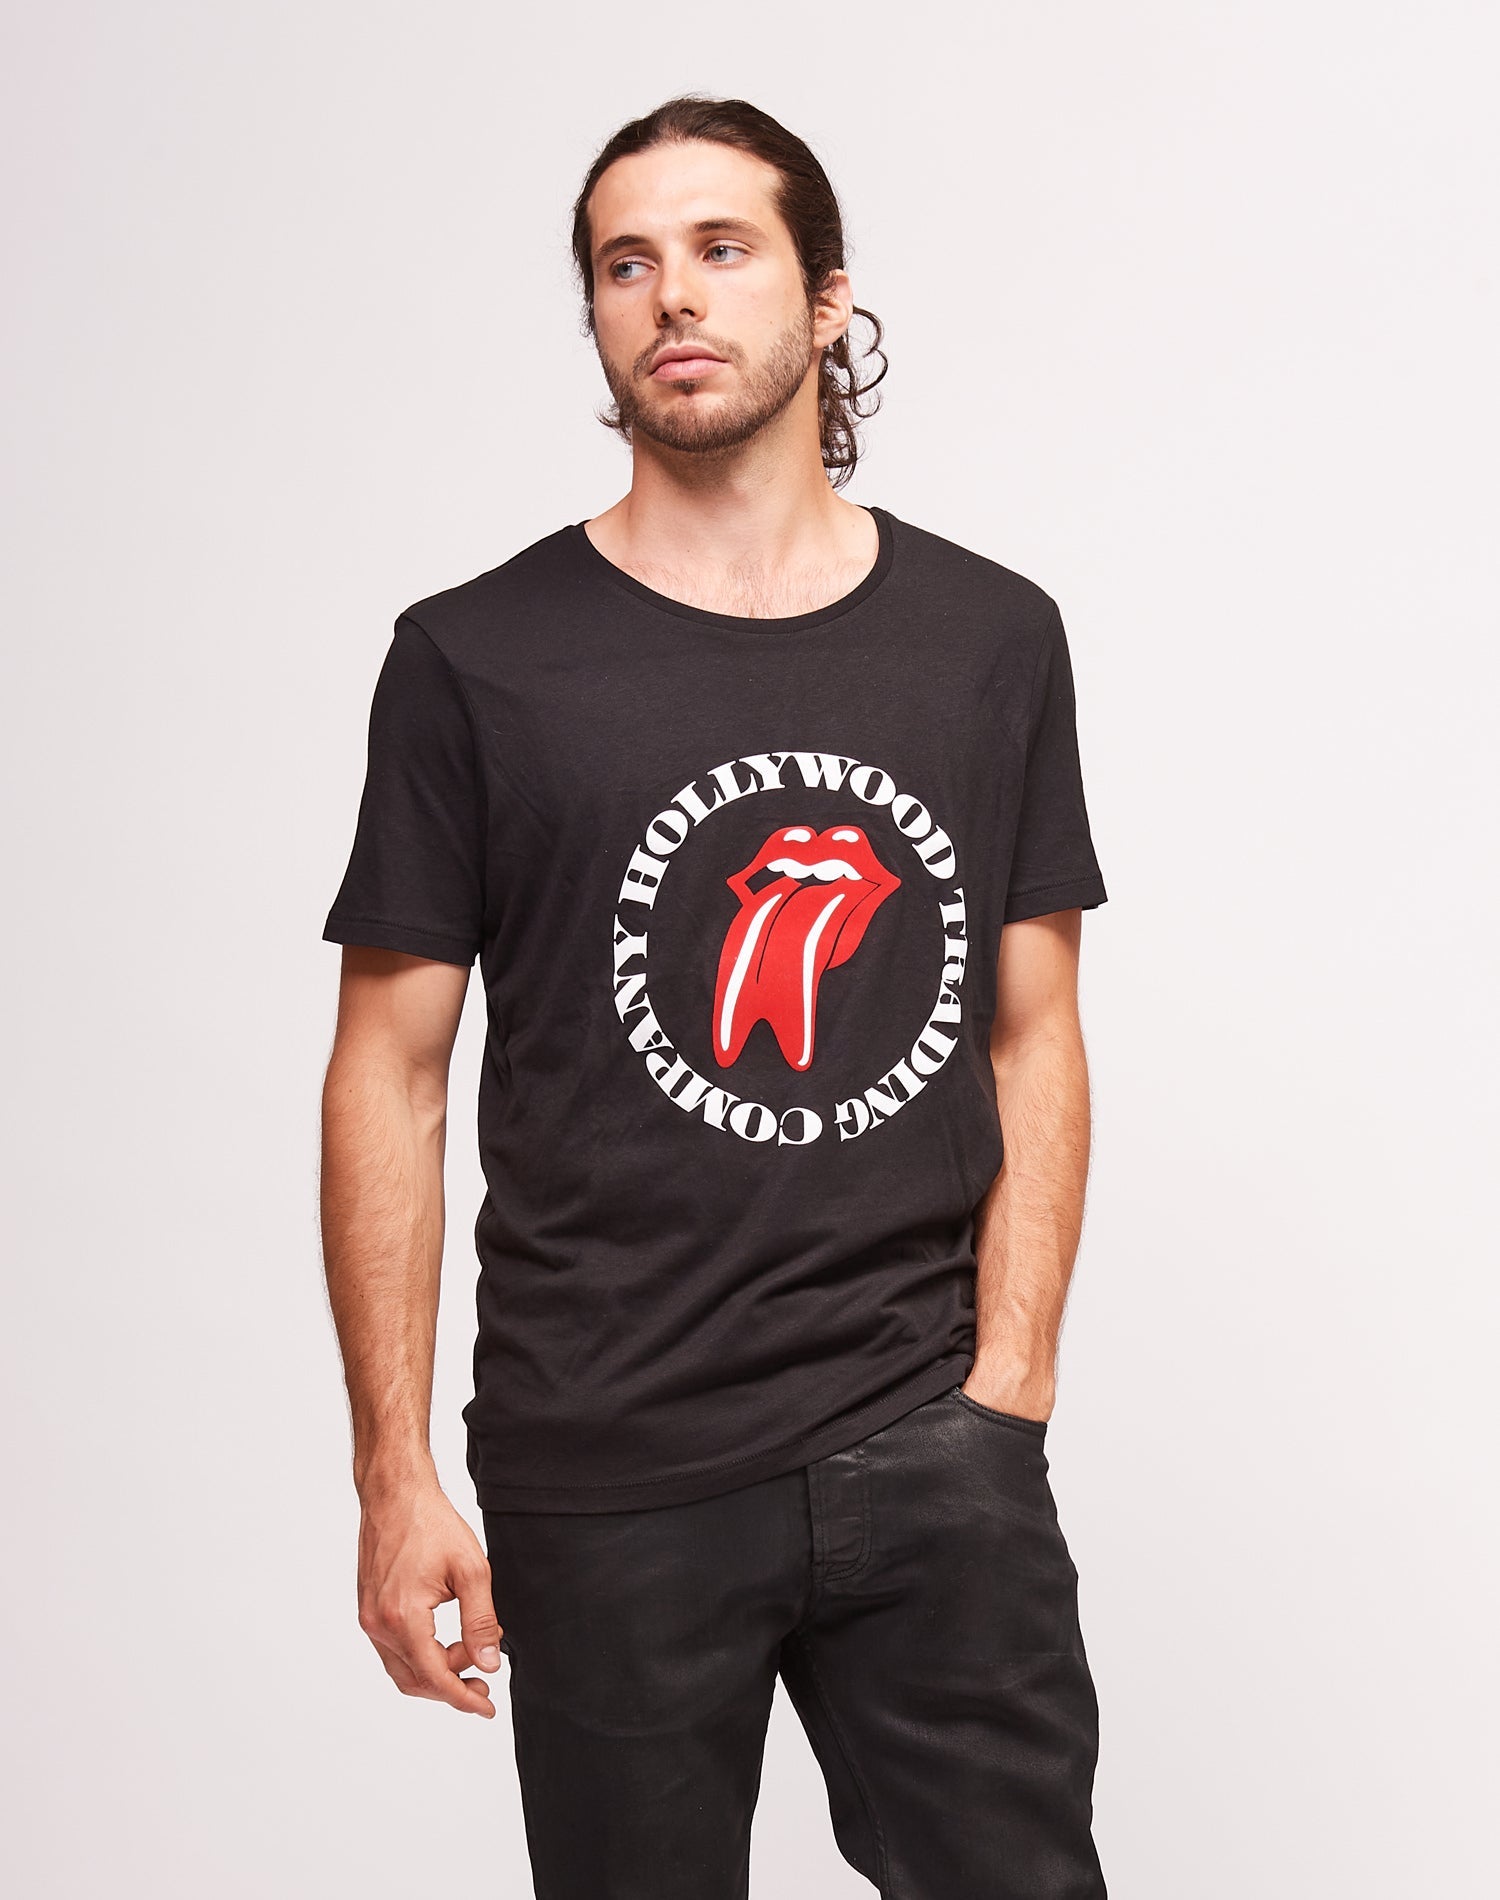 TONGUE FLOCK TSHIRT Crew neck black t shirt with frontal print. Slim fit. 100% cotton. Made in Italy. HTC LOS ANGELES